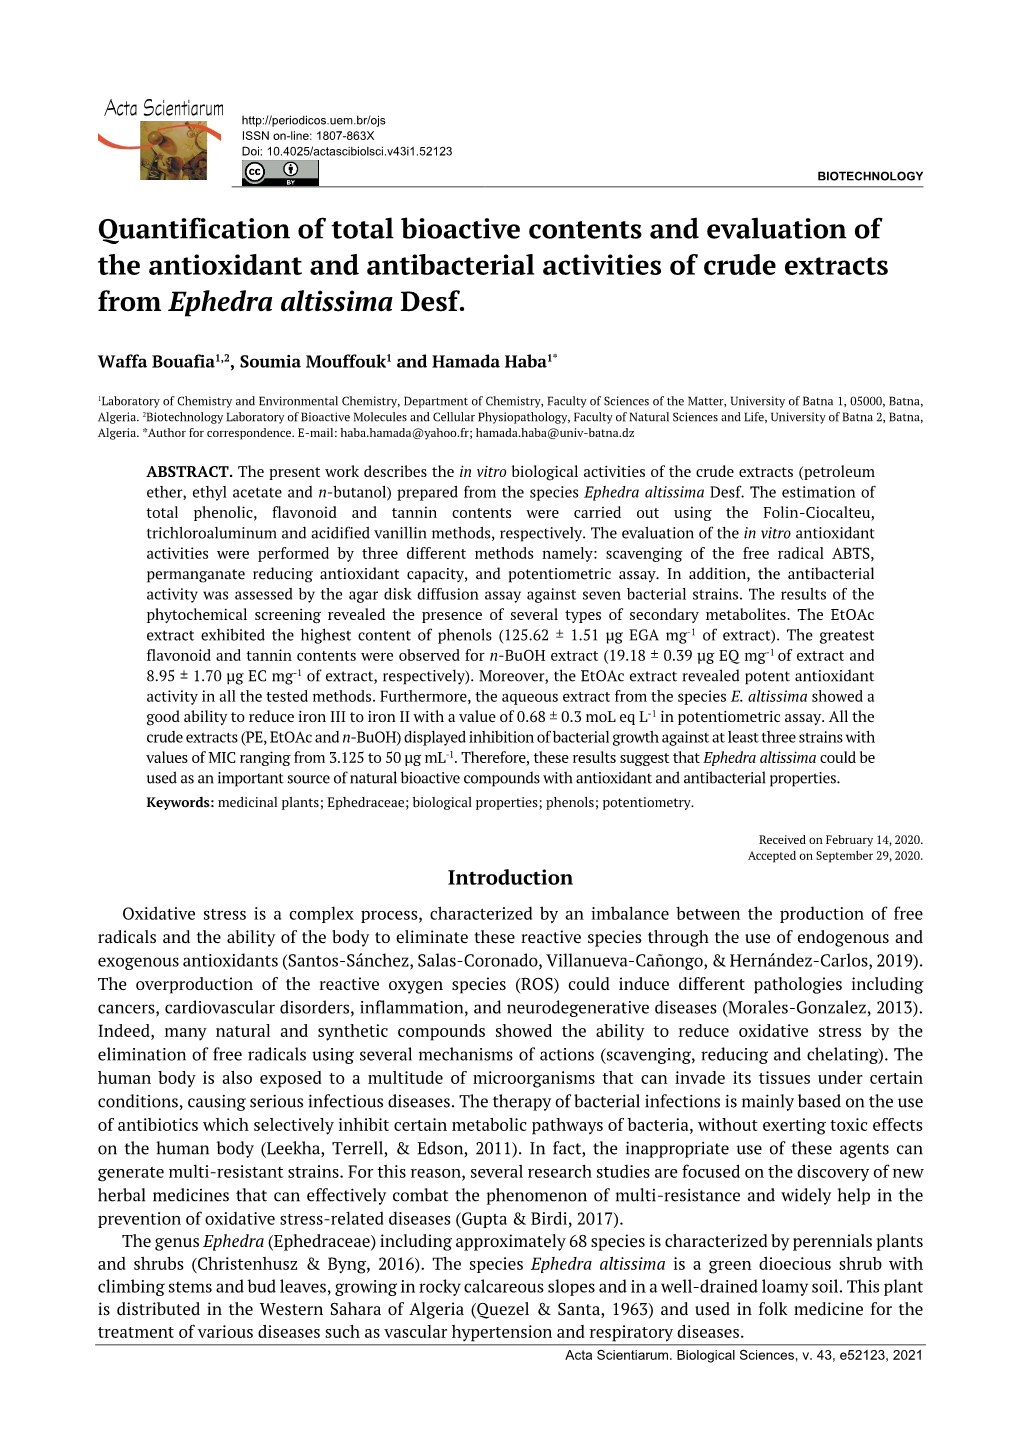 Quantification of Total Bioactive Contents and Evaluation of the Antioxidant and Antibacterial Activities of Crude Extracts from Ephedra Altissima Desf